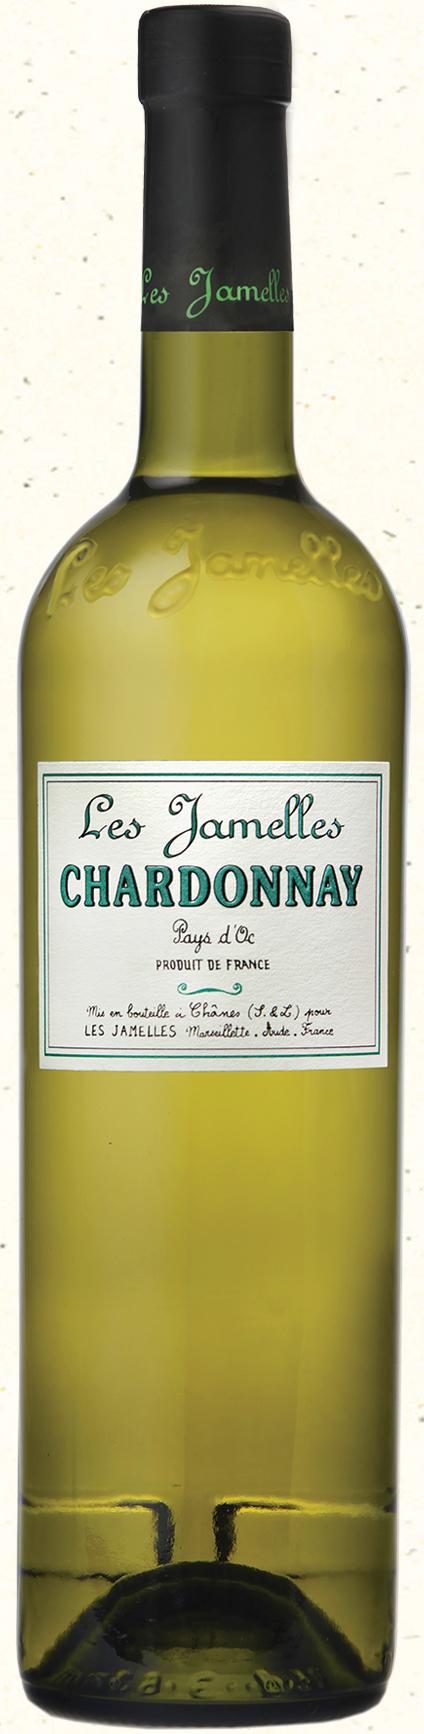 Catherine Delaunay wanted "Les Jamelles Chardonnay" to demonstrate her Burgundian know-how.